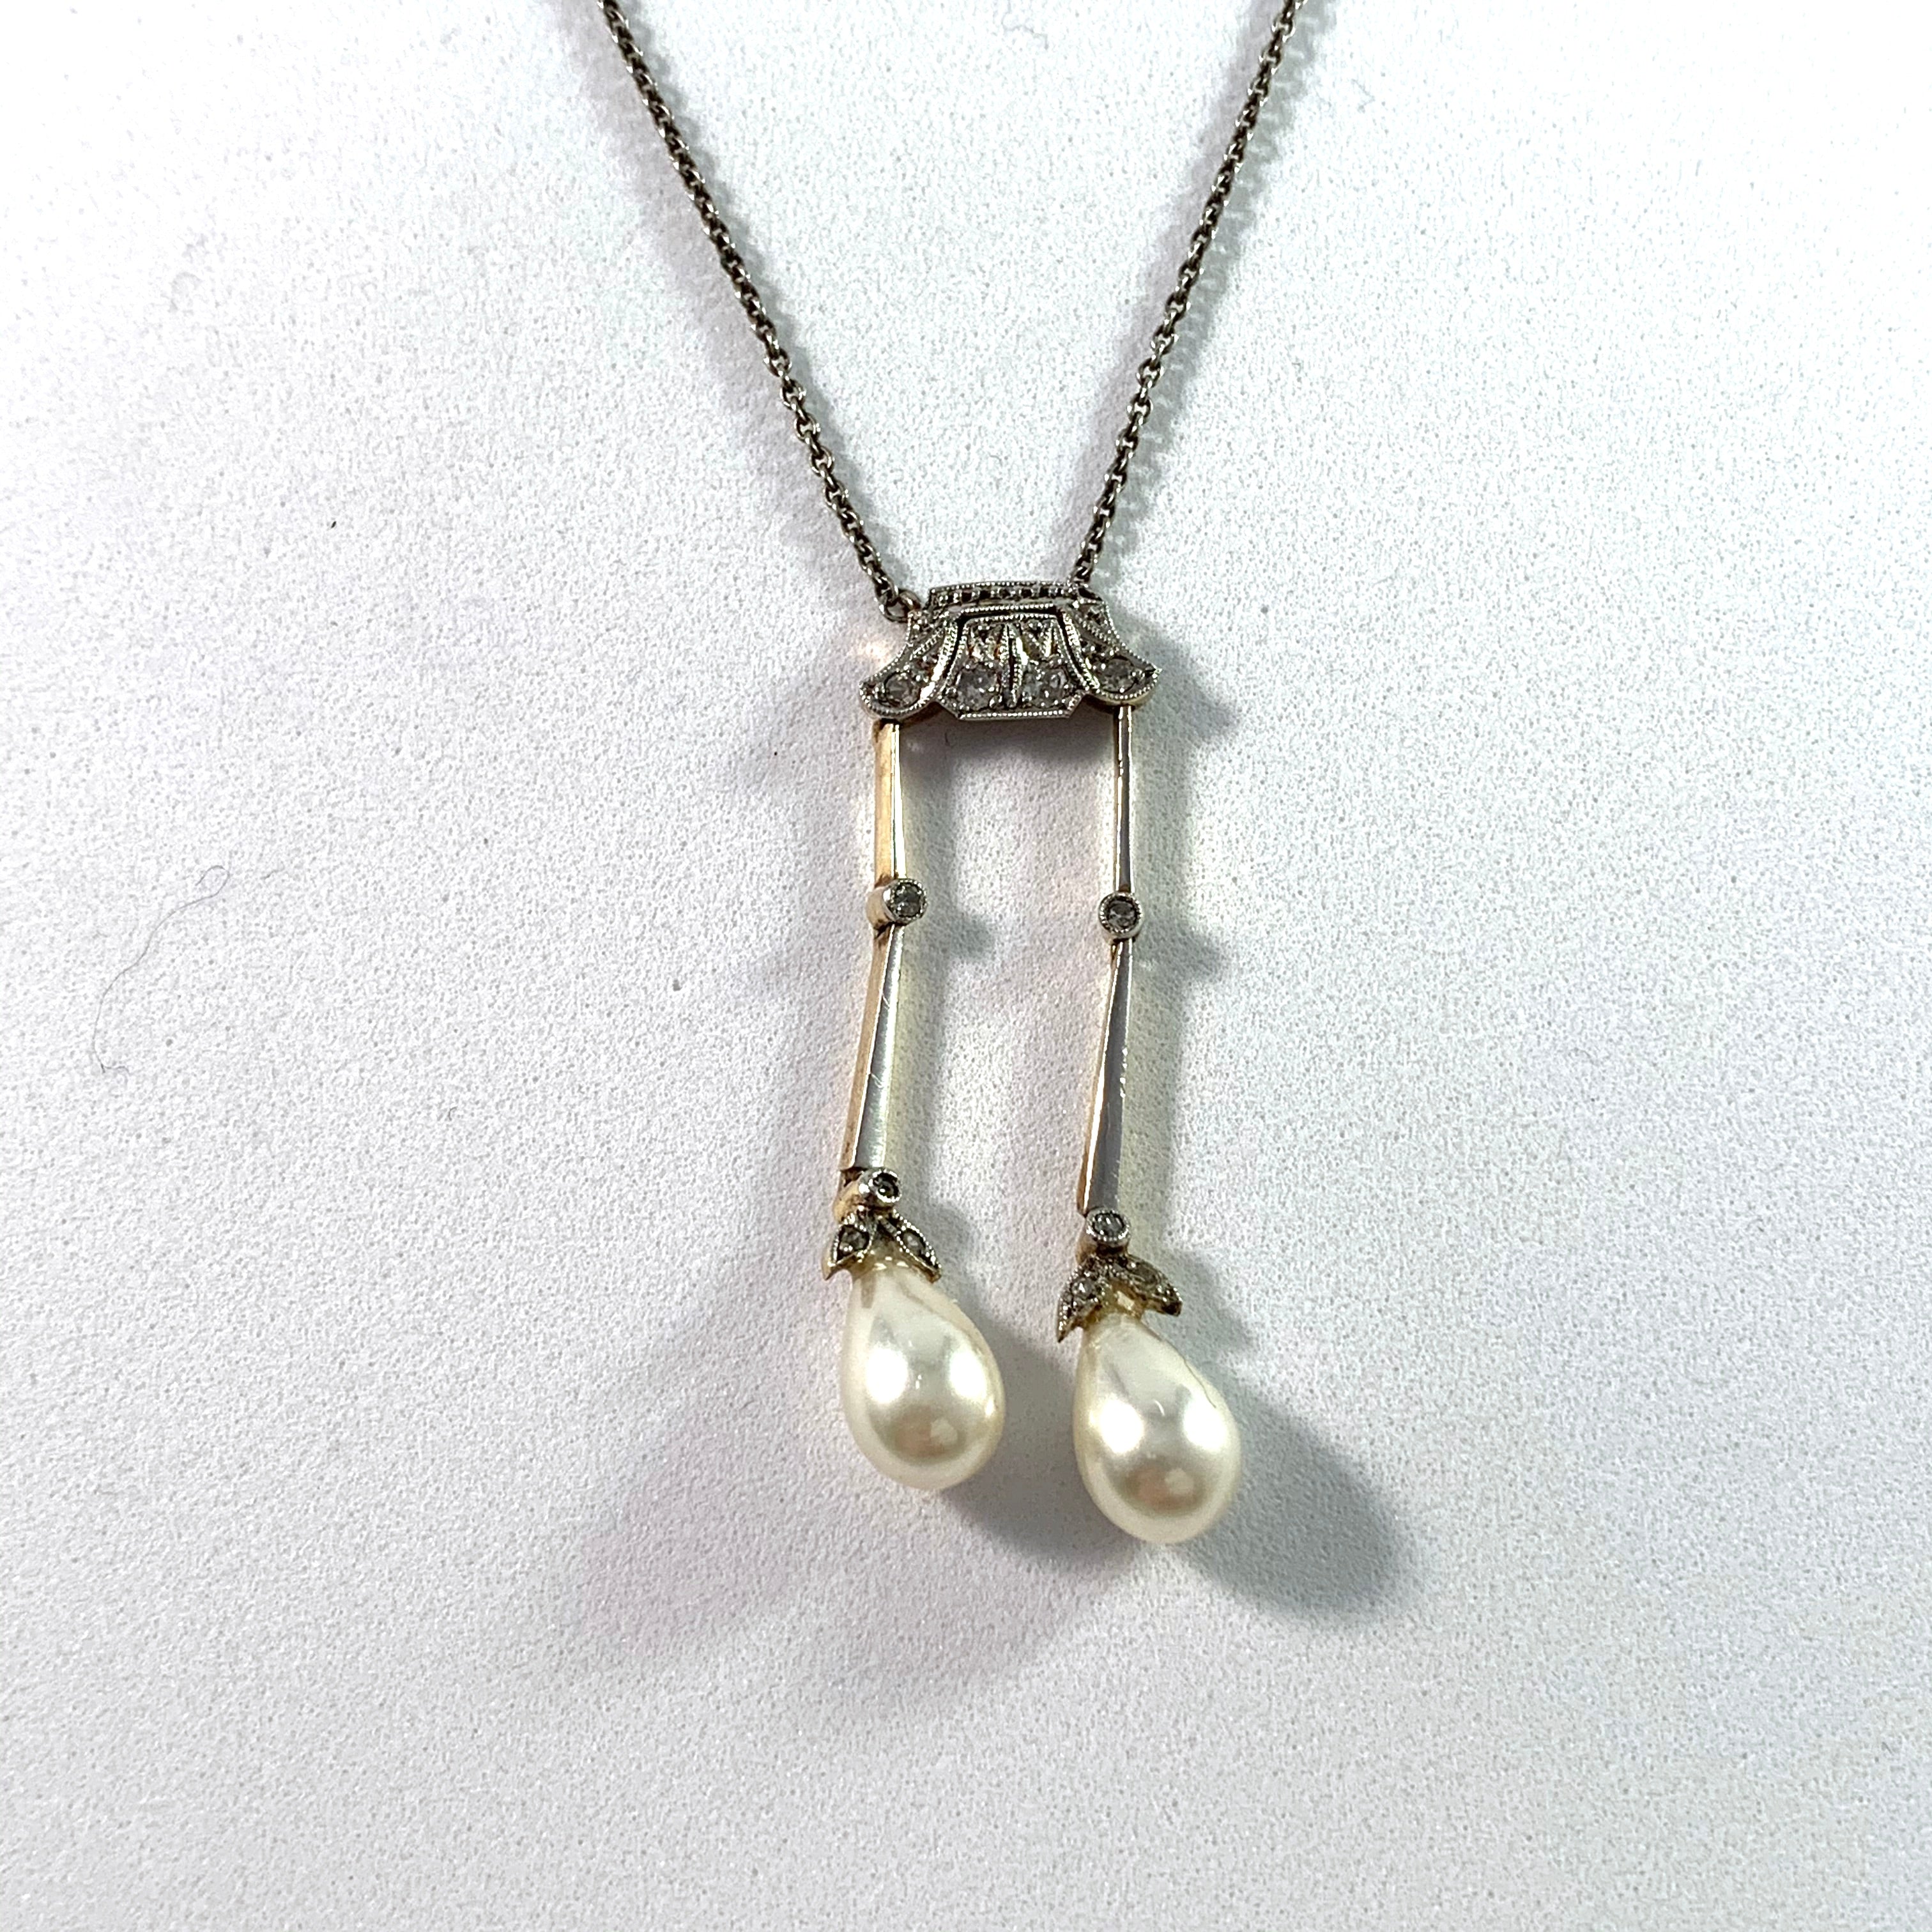 France c 1910 Belle Epoque Platinum 14k Gold Silver Rose Cut Diamond an Faux French Pearl Negligee Necklace